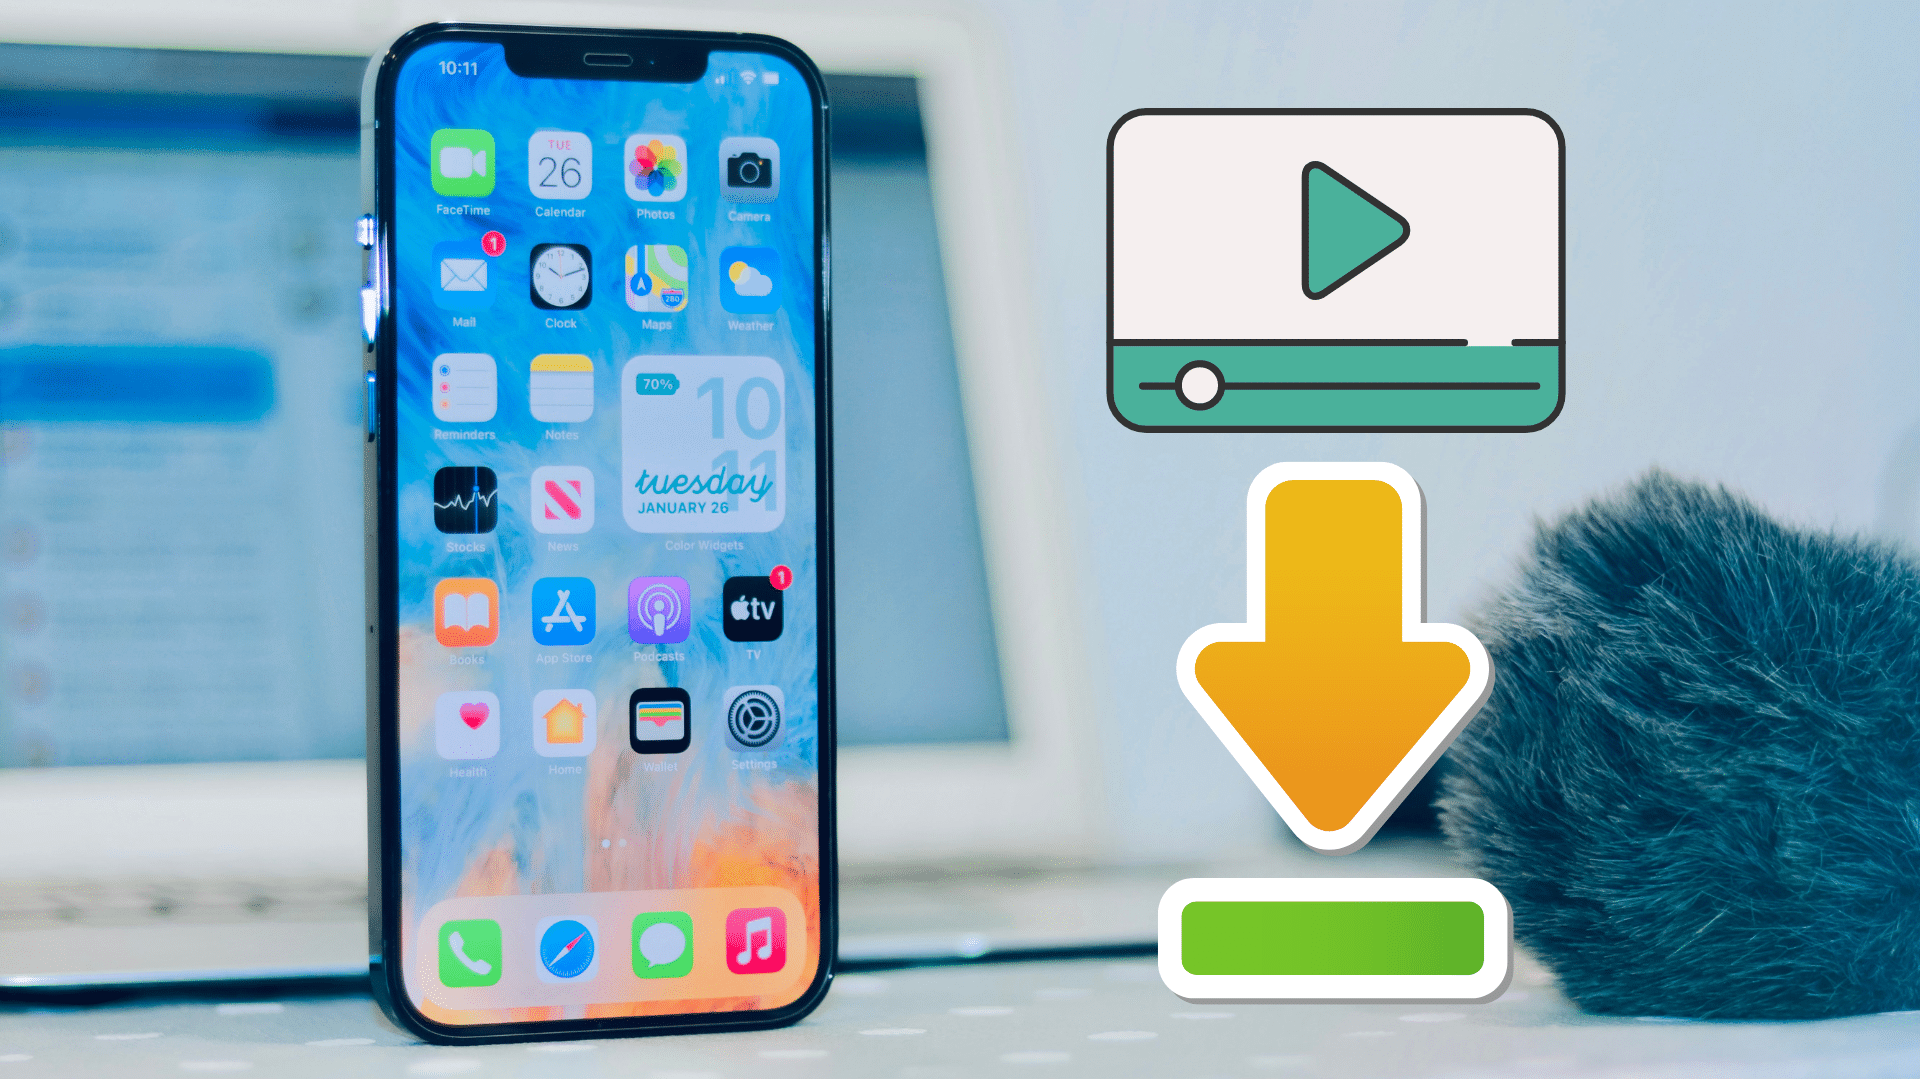 How to Save Videos to iPhone